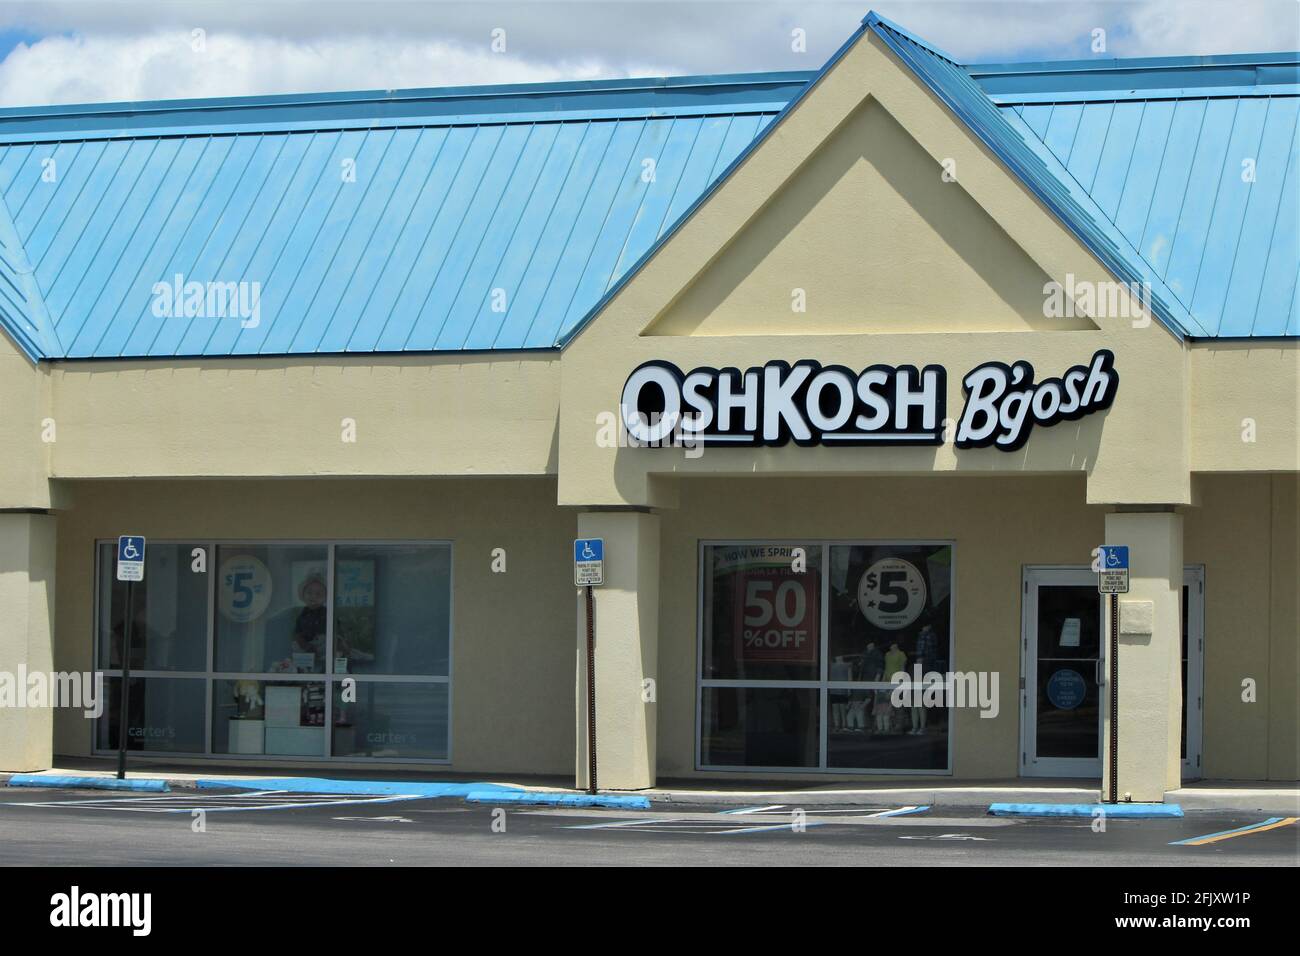 Children's clothing store, OshKosh B'gosh in Hialeah, FL. The store is closed due to COVID-19, corona virus pandemic following the stay at home order. Stock Photo